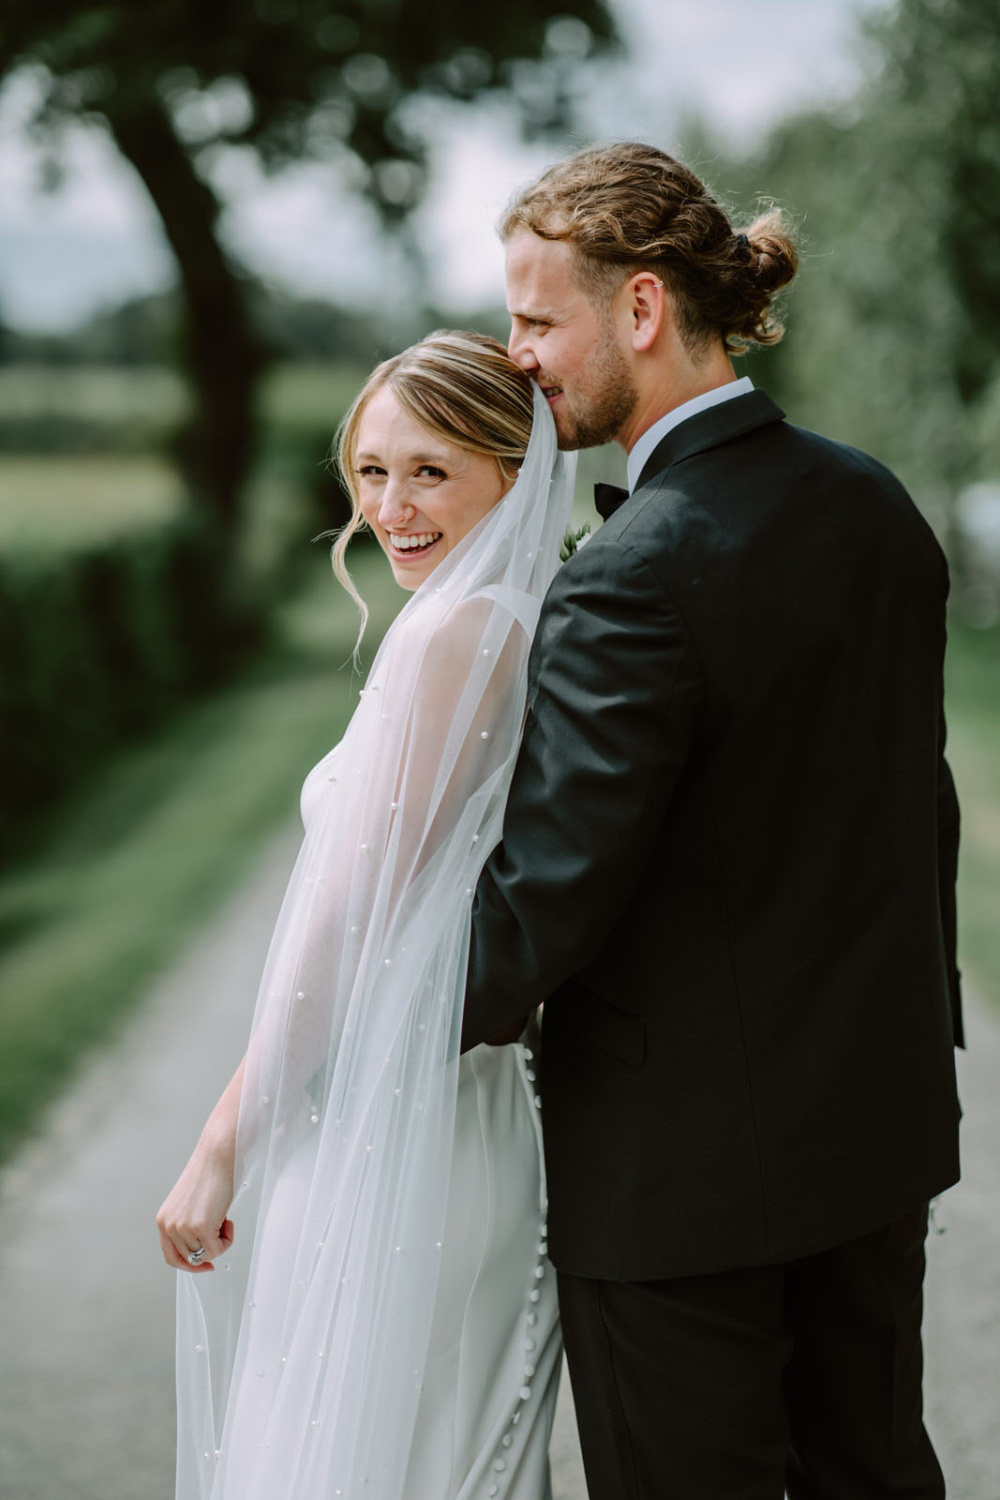 A bride and groom embracing on a path.